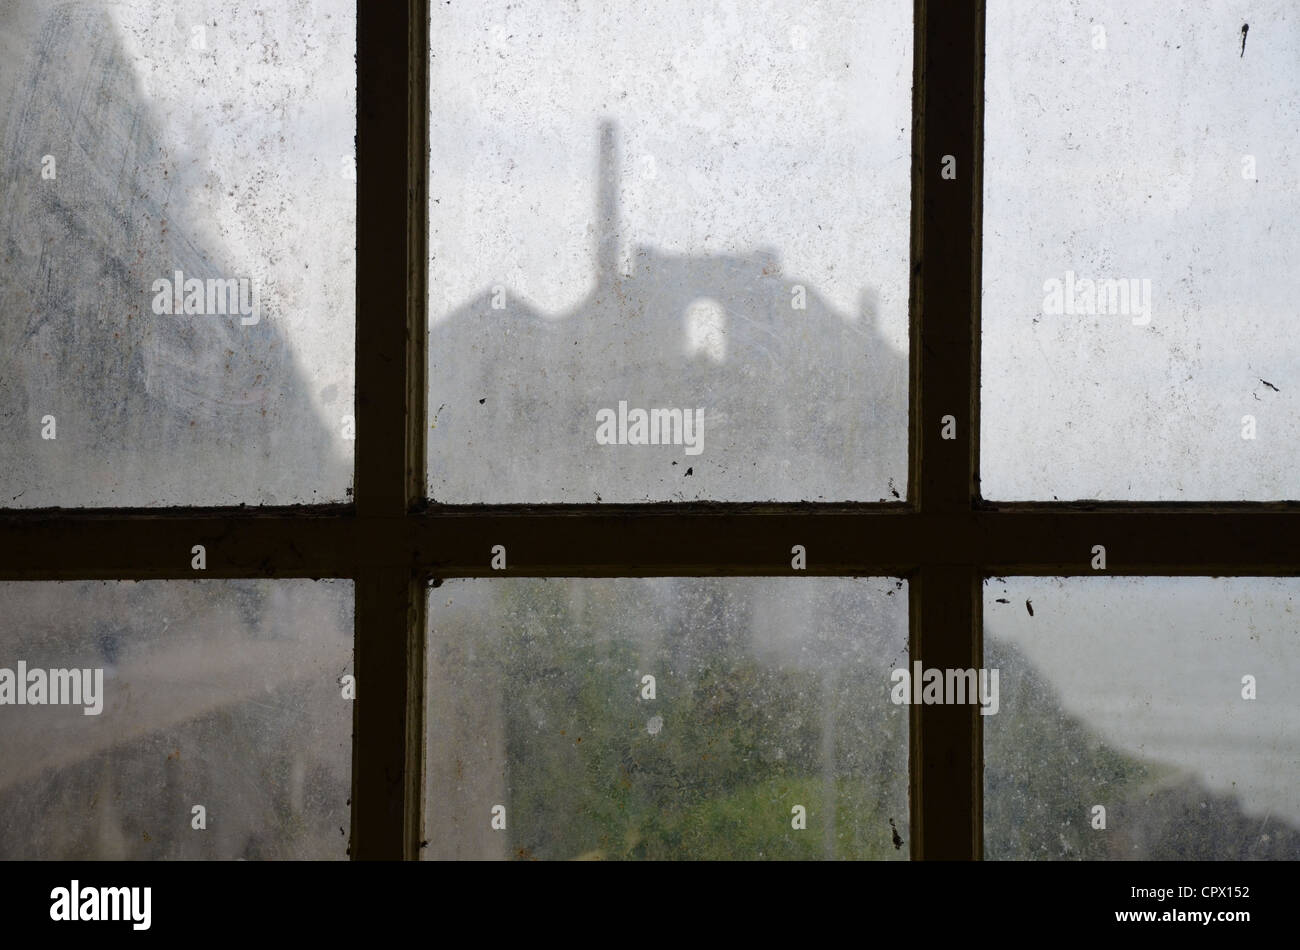 Alcatraz island, the officers' club, viewed from behind a dirty window Stock Photo